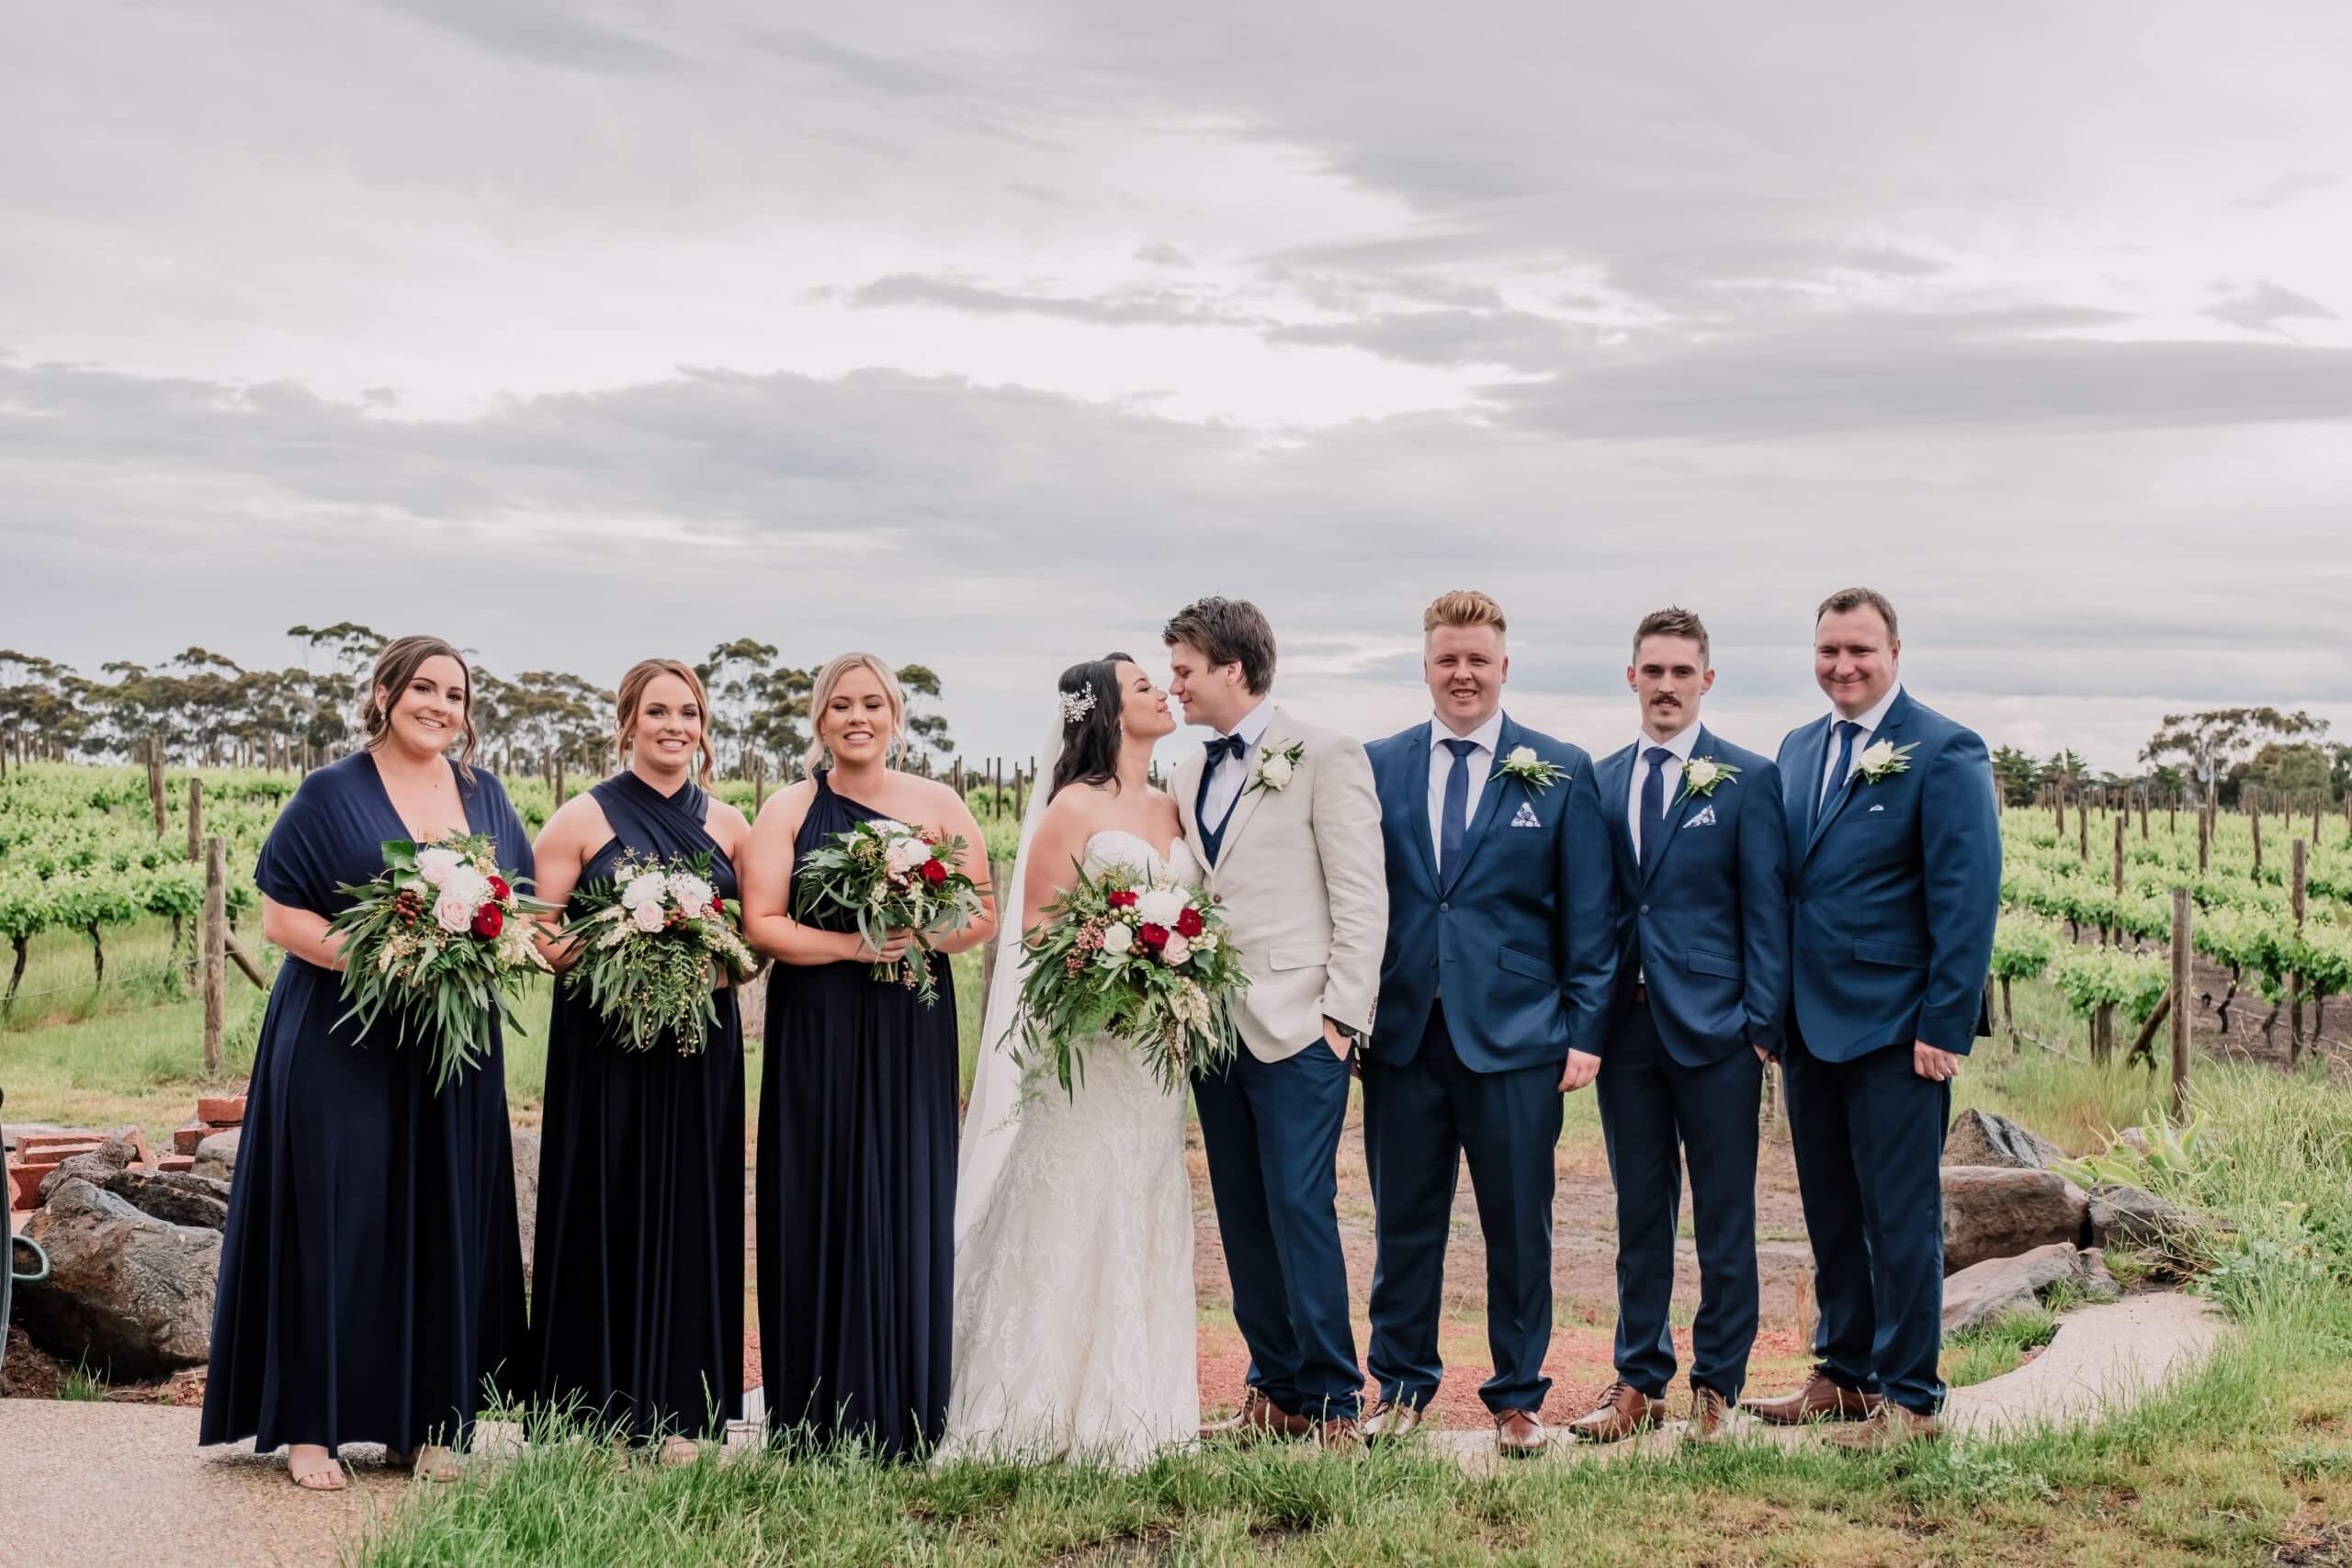 A stunning bridal party photo captured at dusk. The bride and groom, along with their bridesmaids and groomsmen - wearing midnight blue, are surrounded by the soft and warm colors of the setting sun.